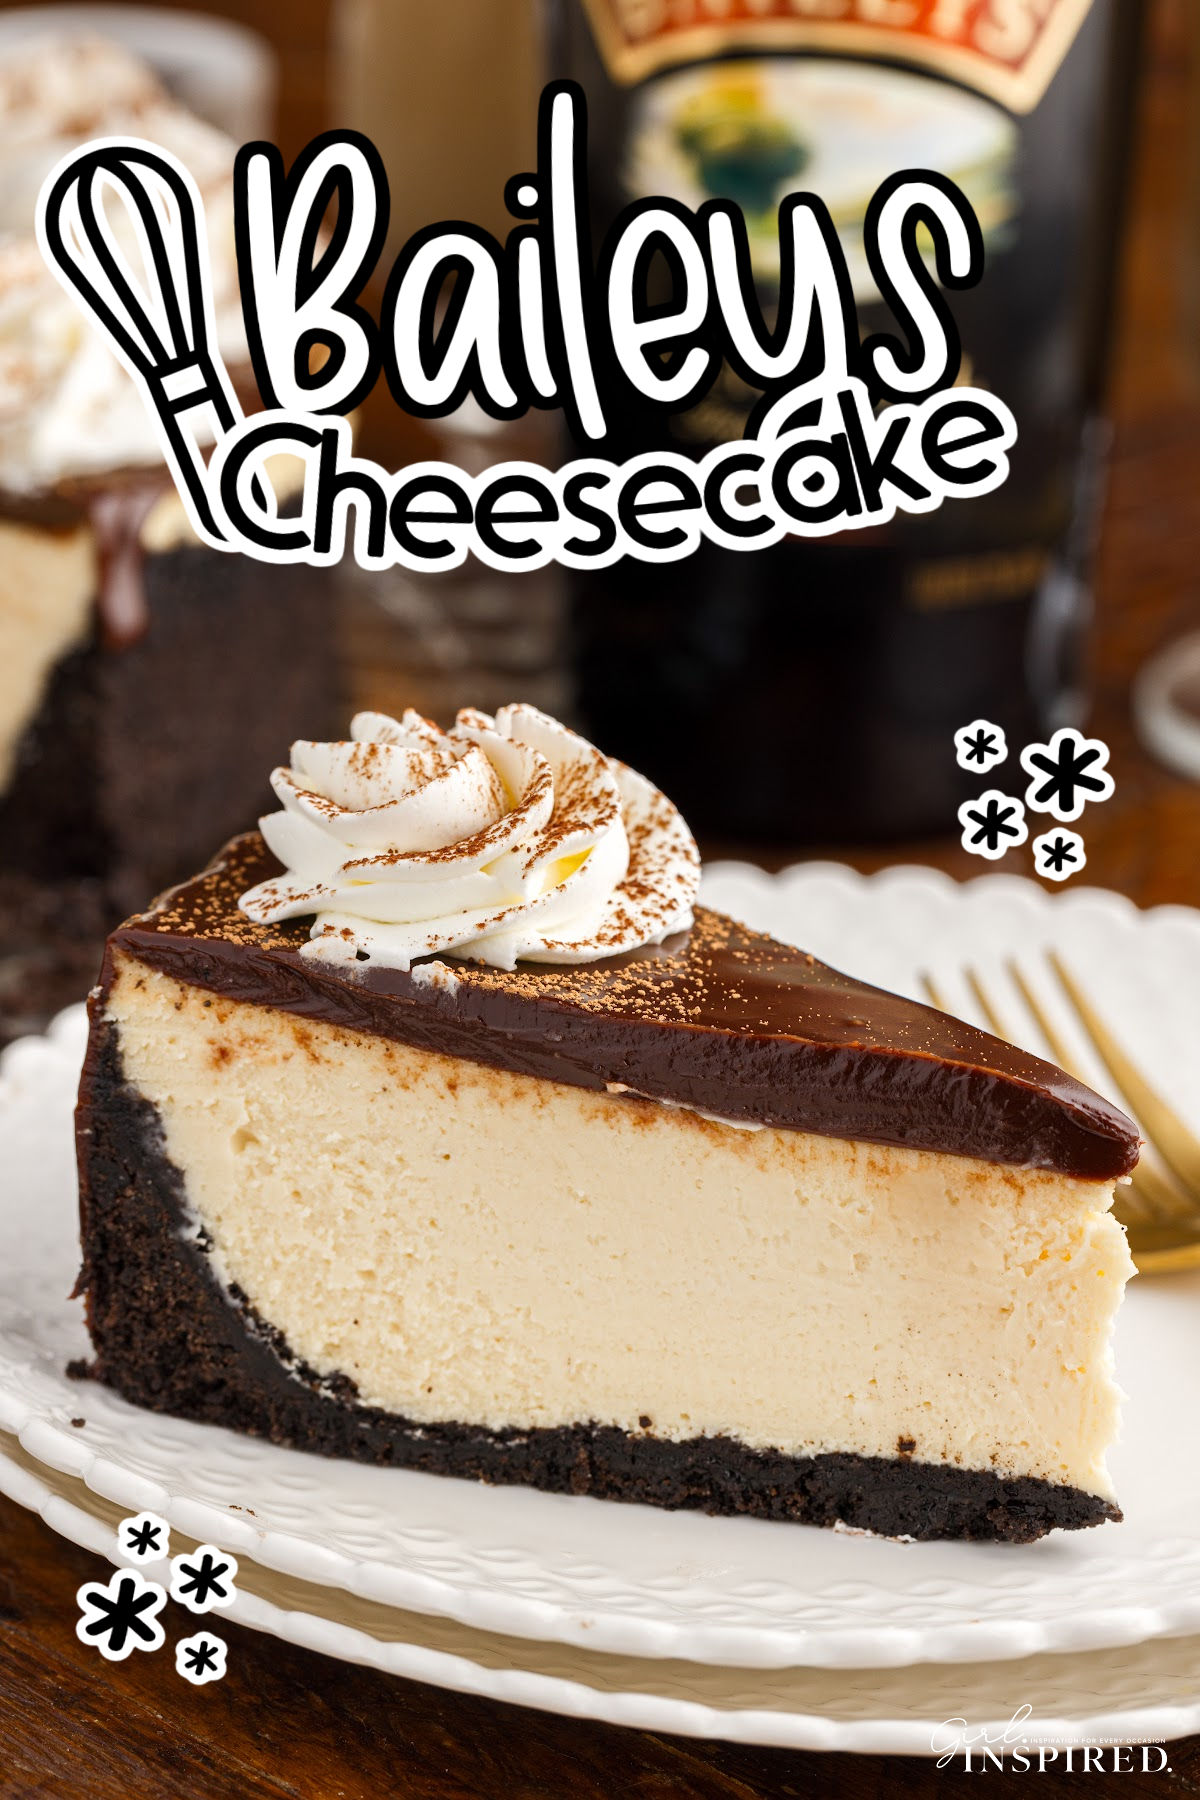 A slice of Baileys Cheesecake on a plate with text overlay.